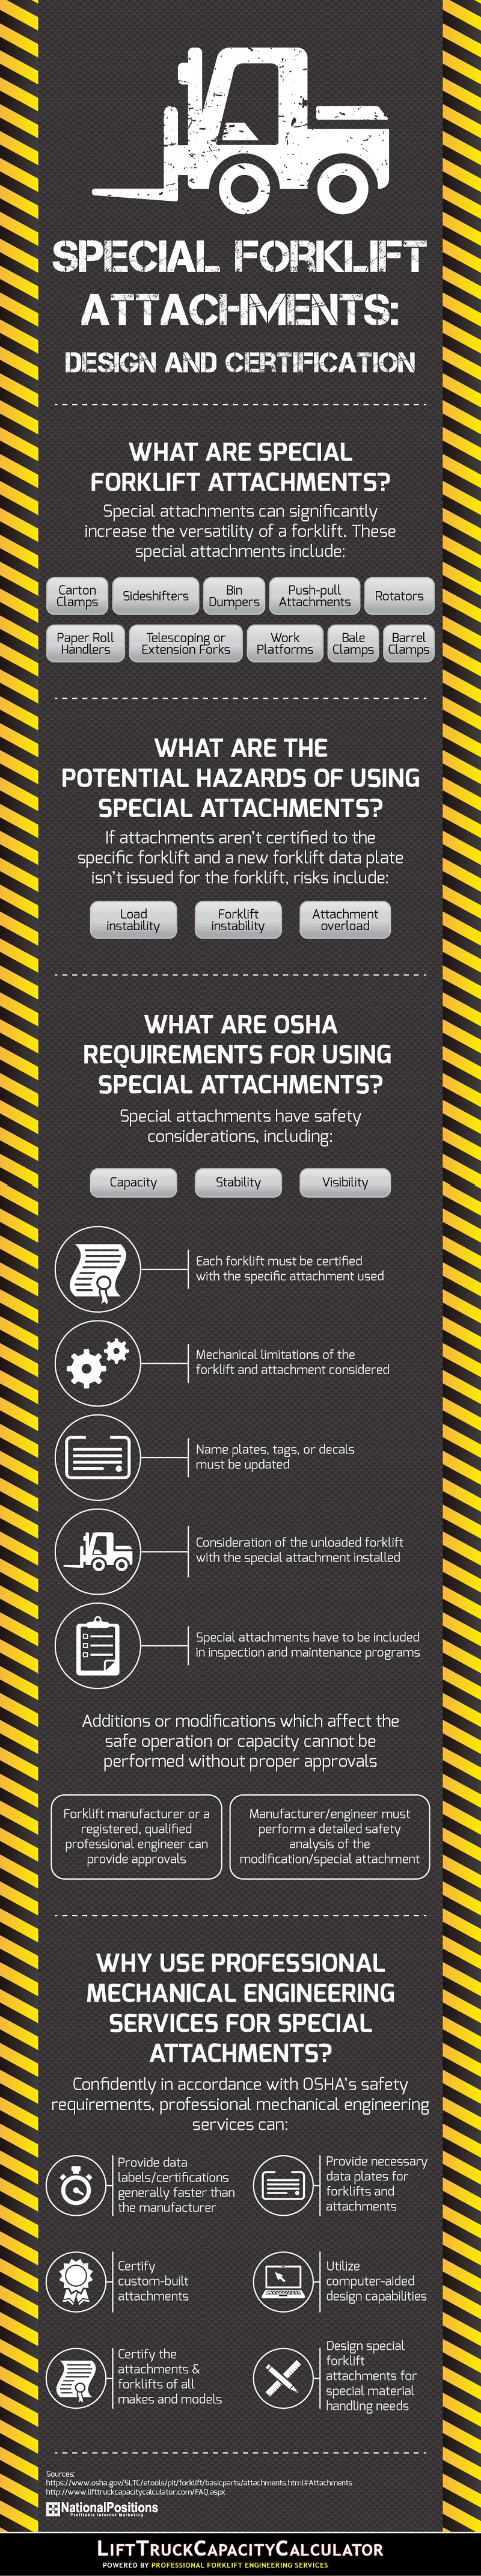 Special Forklift Attachments Infographic